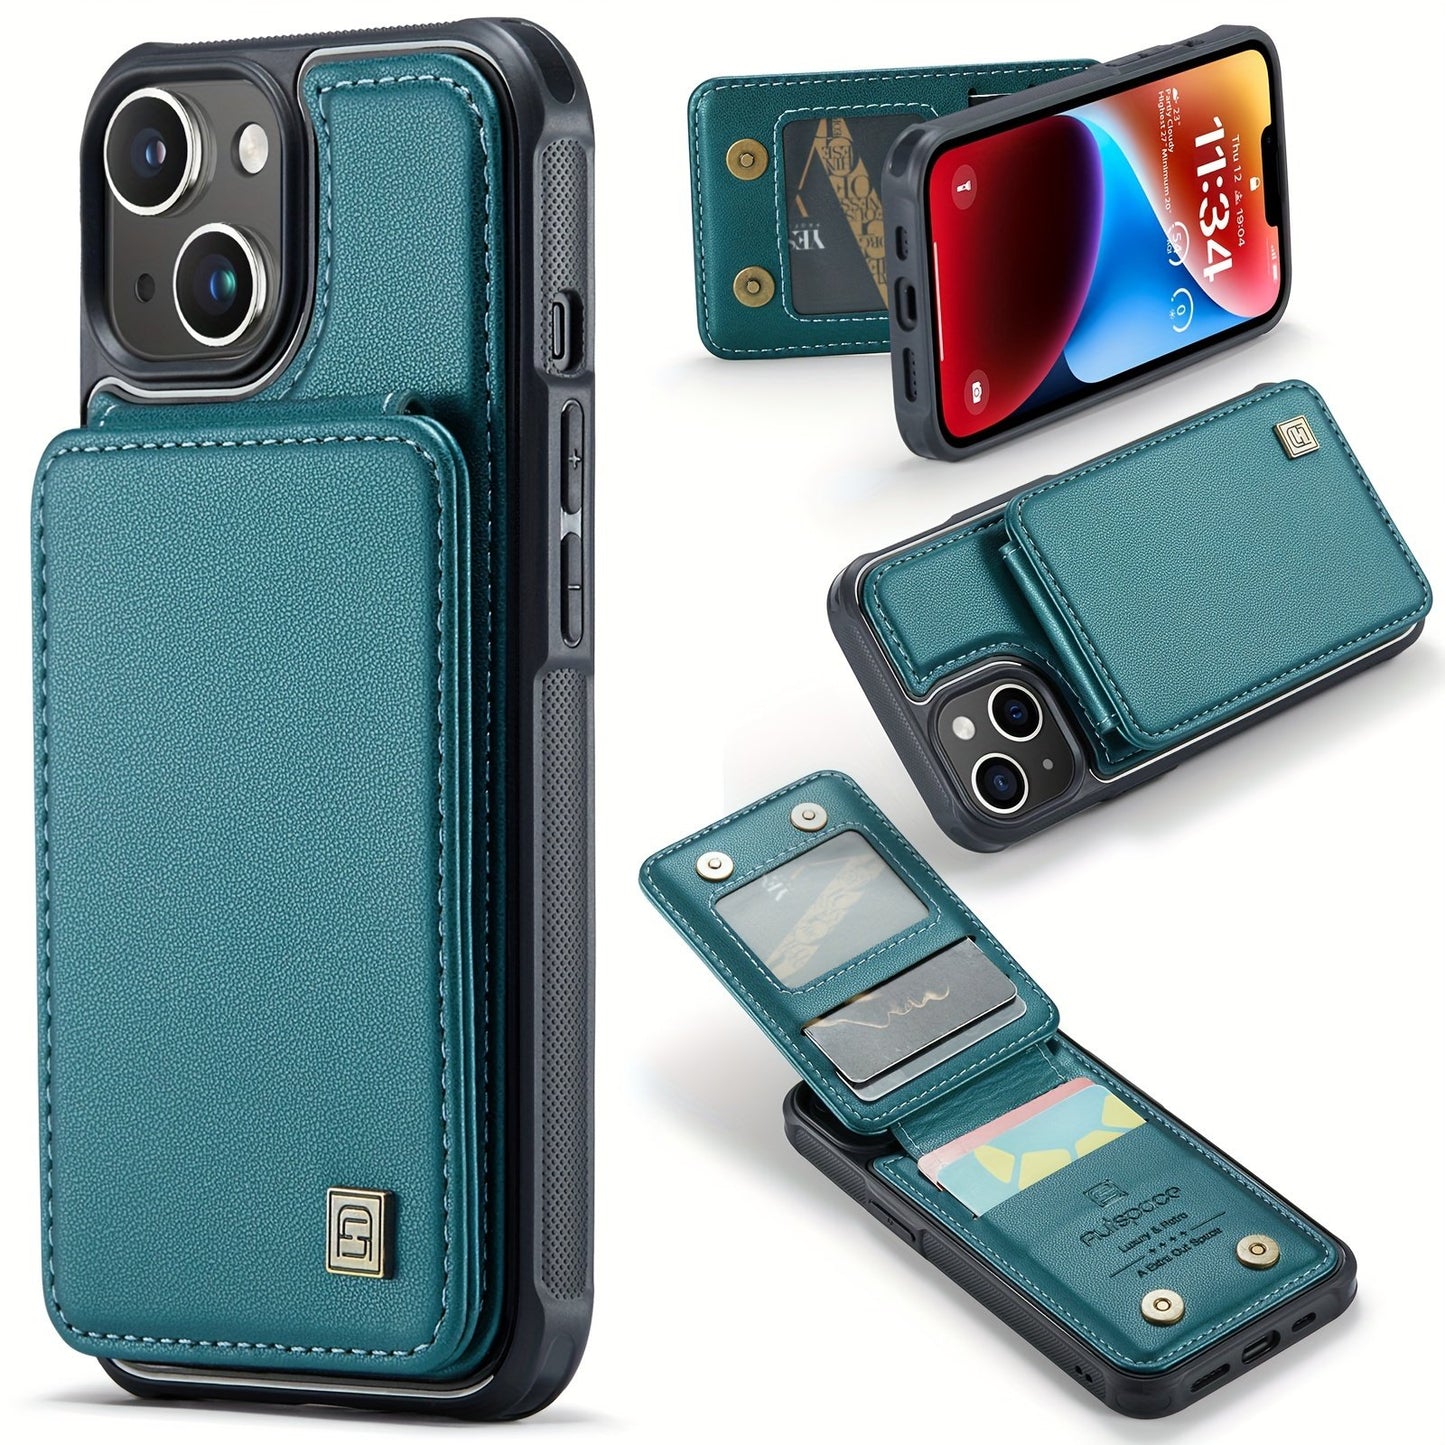 Multifunctional Card Holder And Mobile Phone Case For IPhone 14promax Card Wallet Apple 12mini Adds Anti-theft Compartment IPhone11pro Can Absorb Car Bracket Couple Mobile Phone Case Case